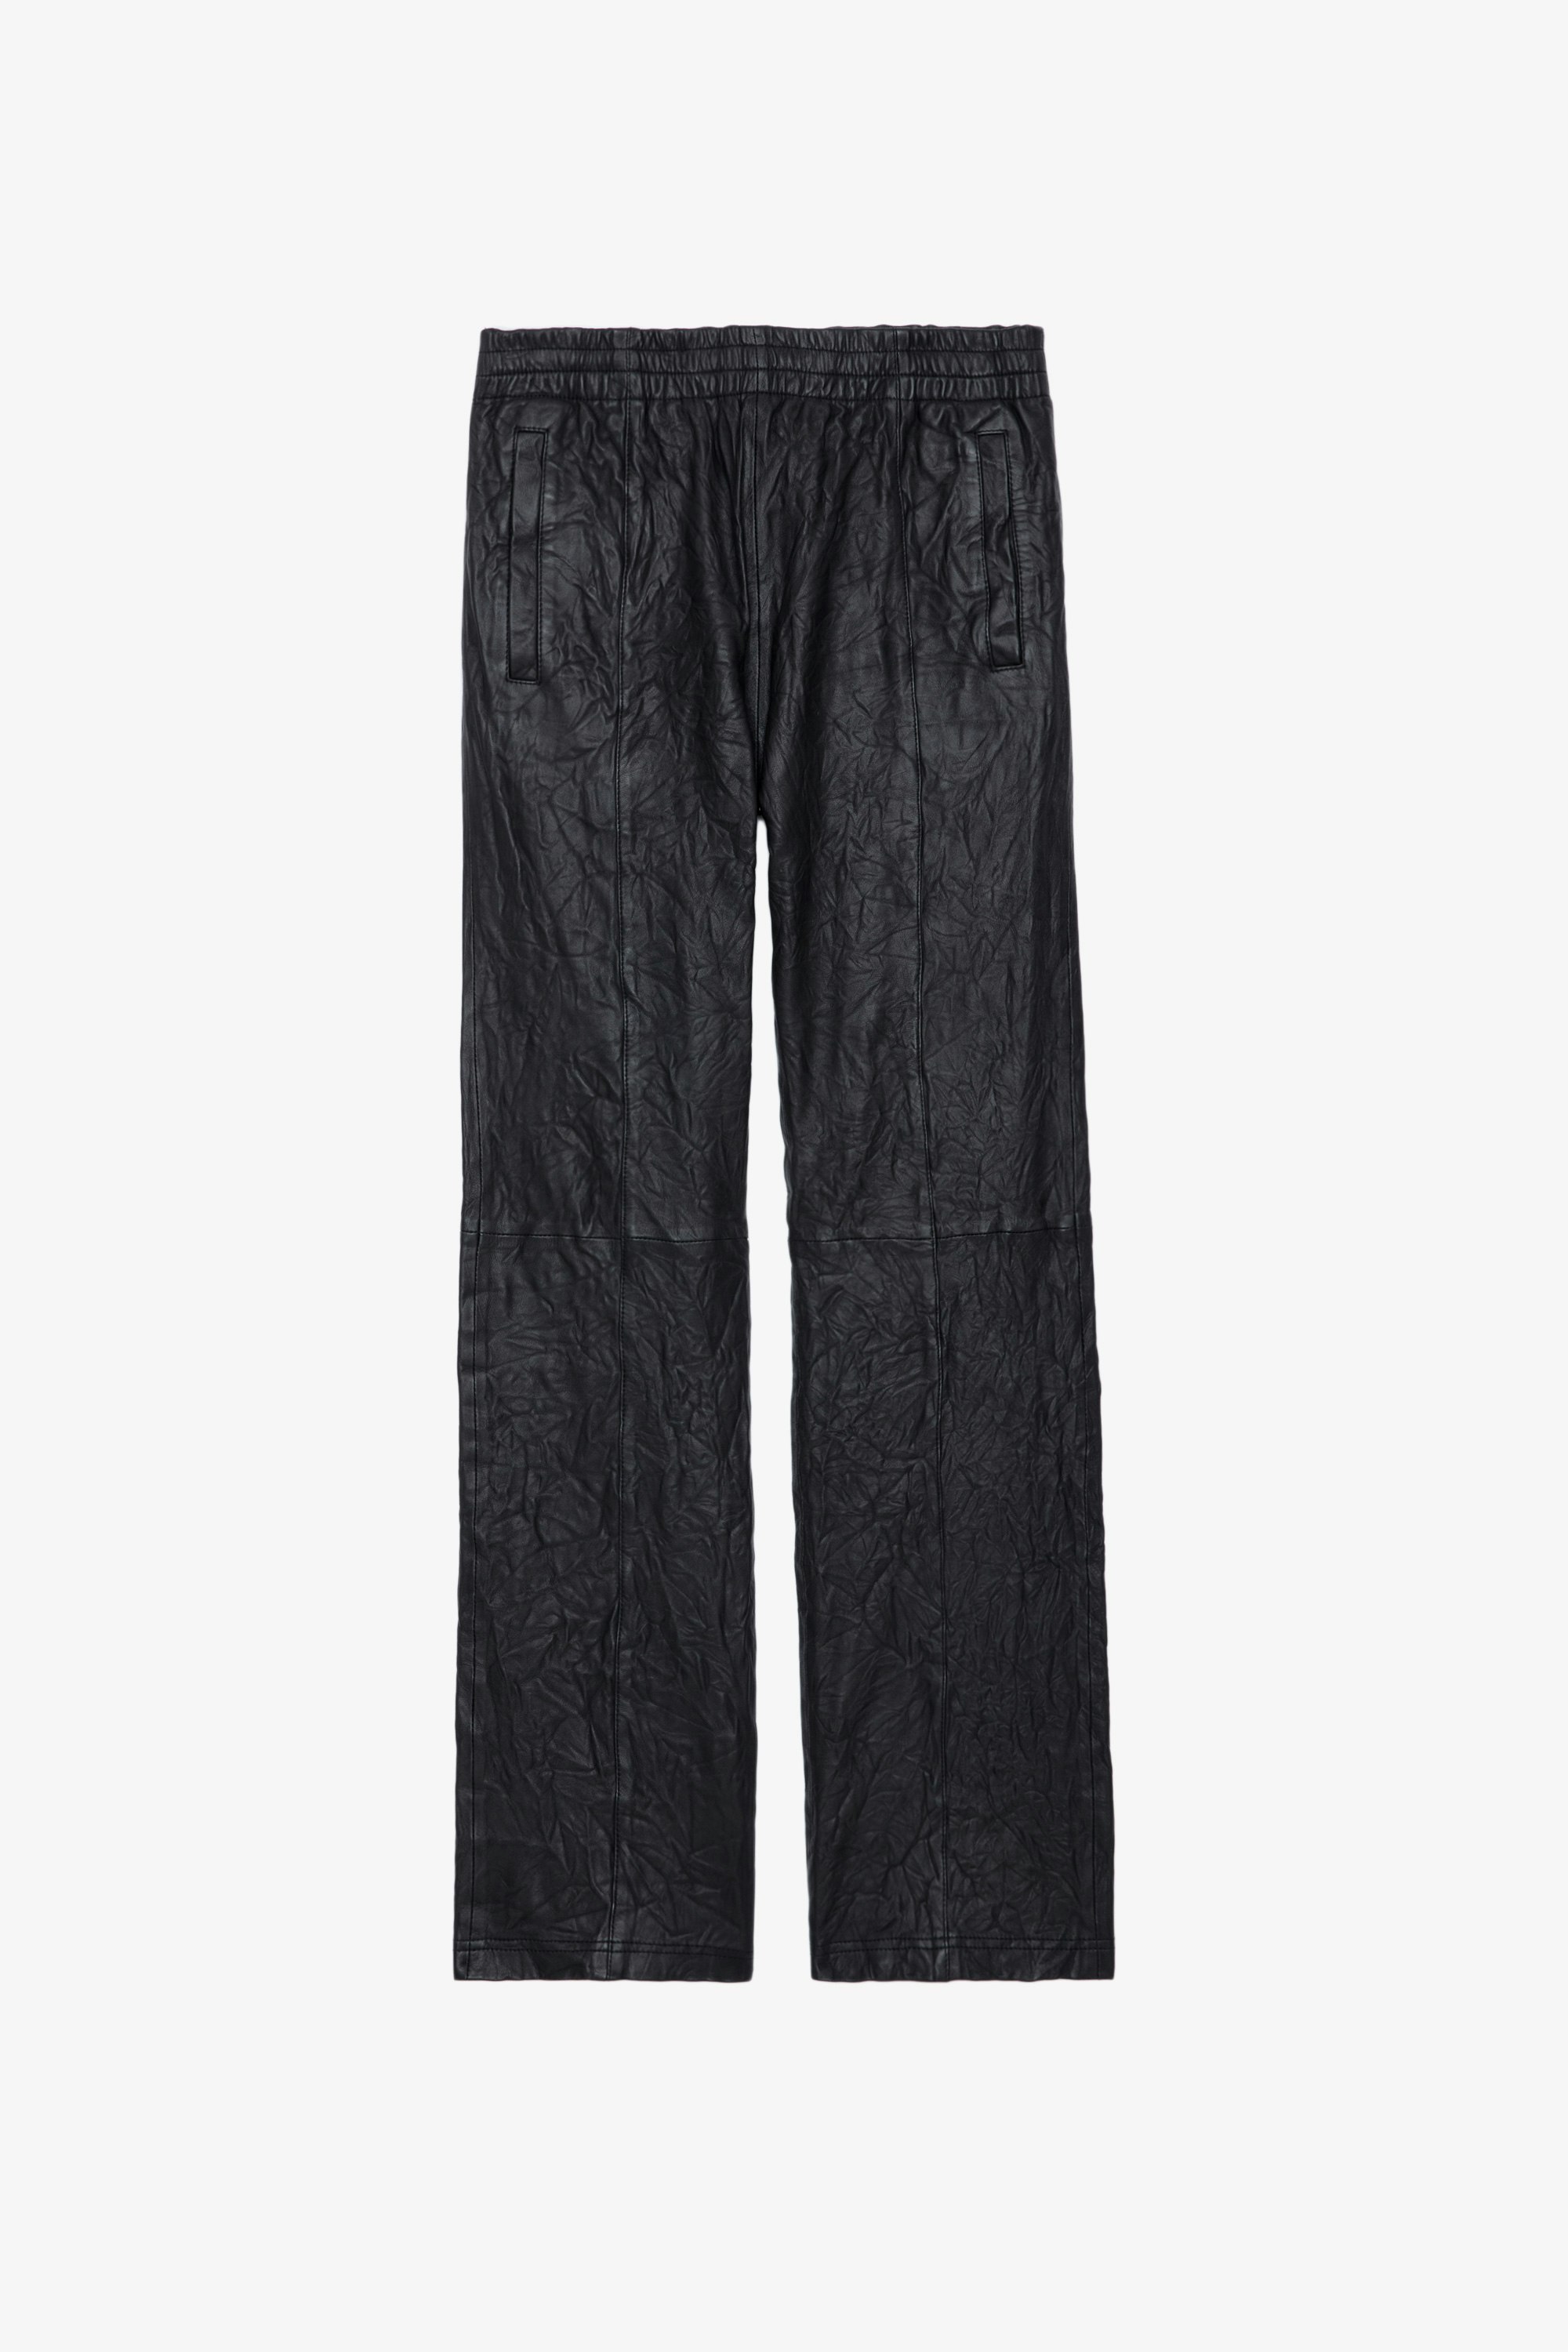 Pacha Crinkled Leather Pants - Black crinkled leather trousers with elasticated waistband.